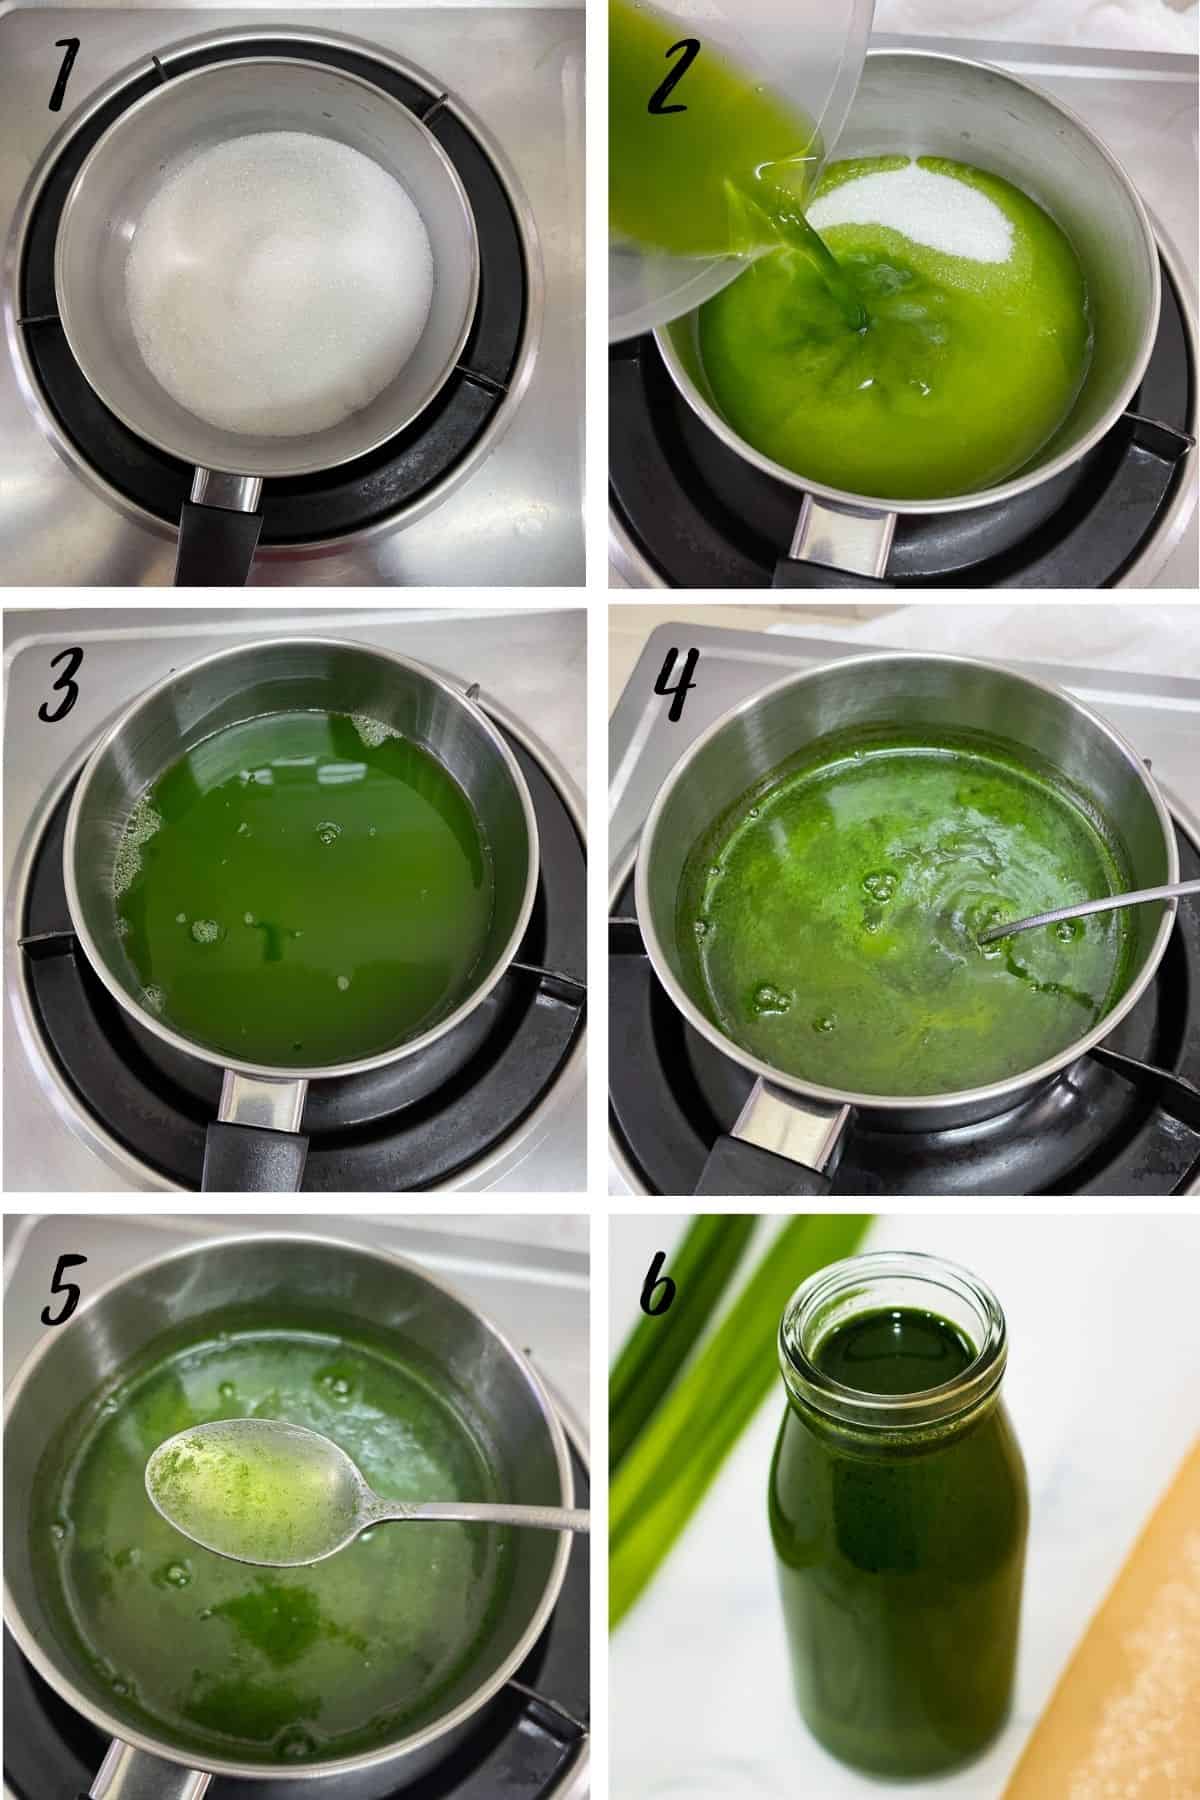 A poster 6 images showing how to make simple green syrup.